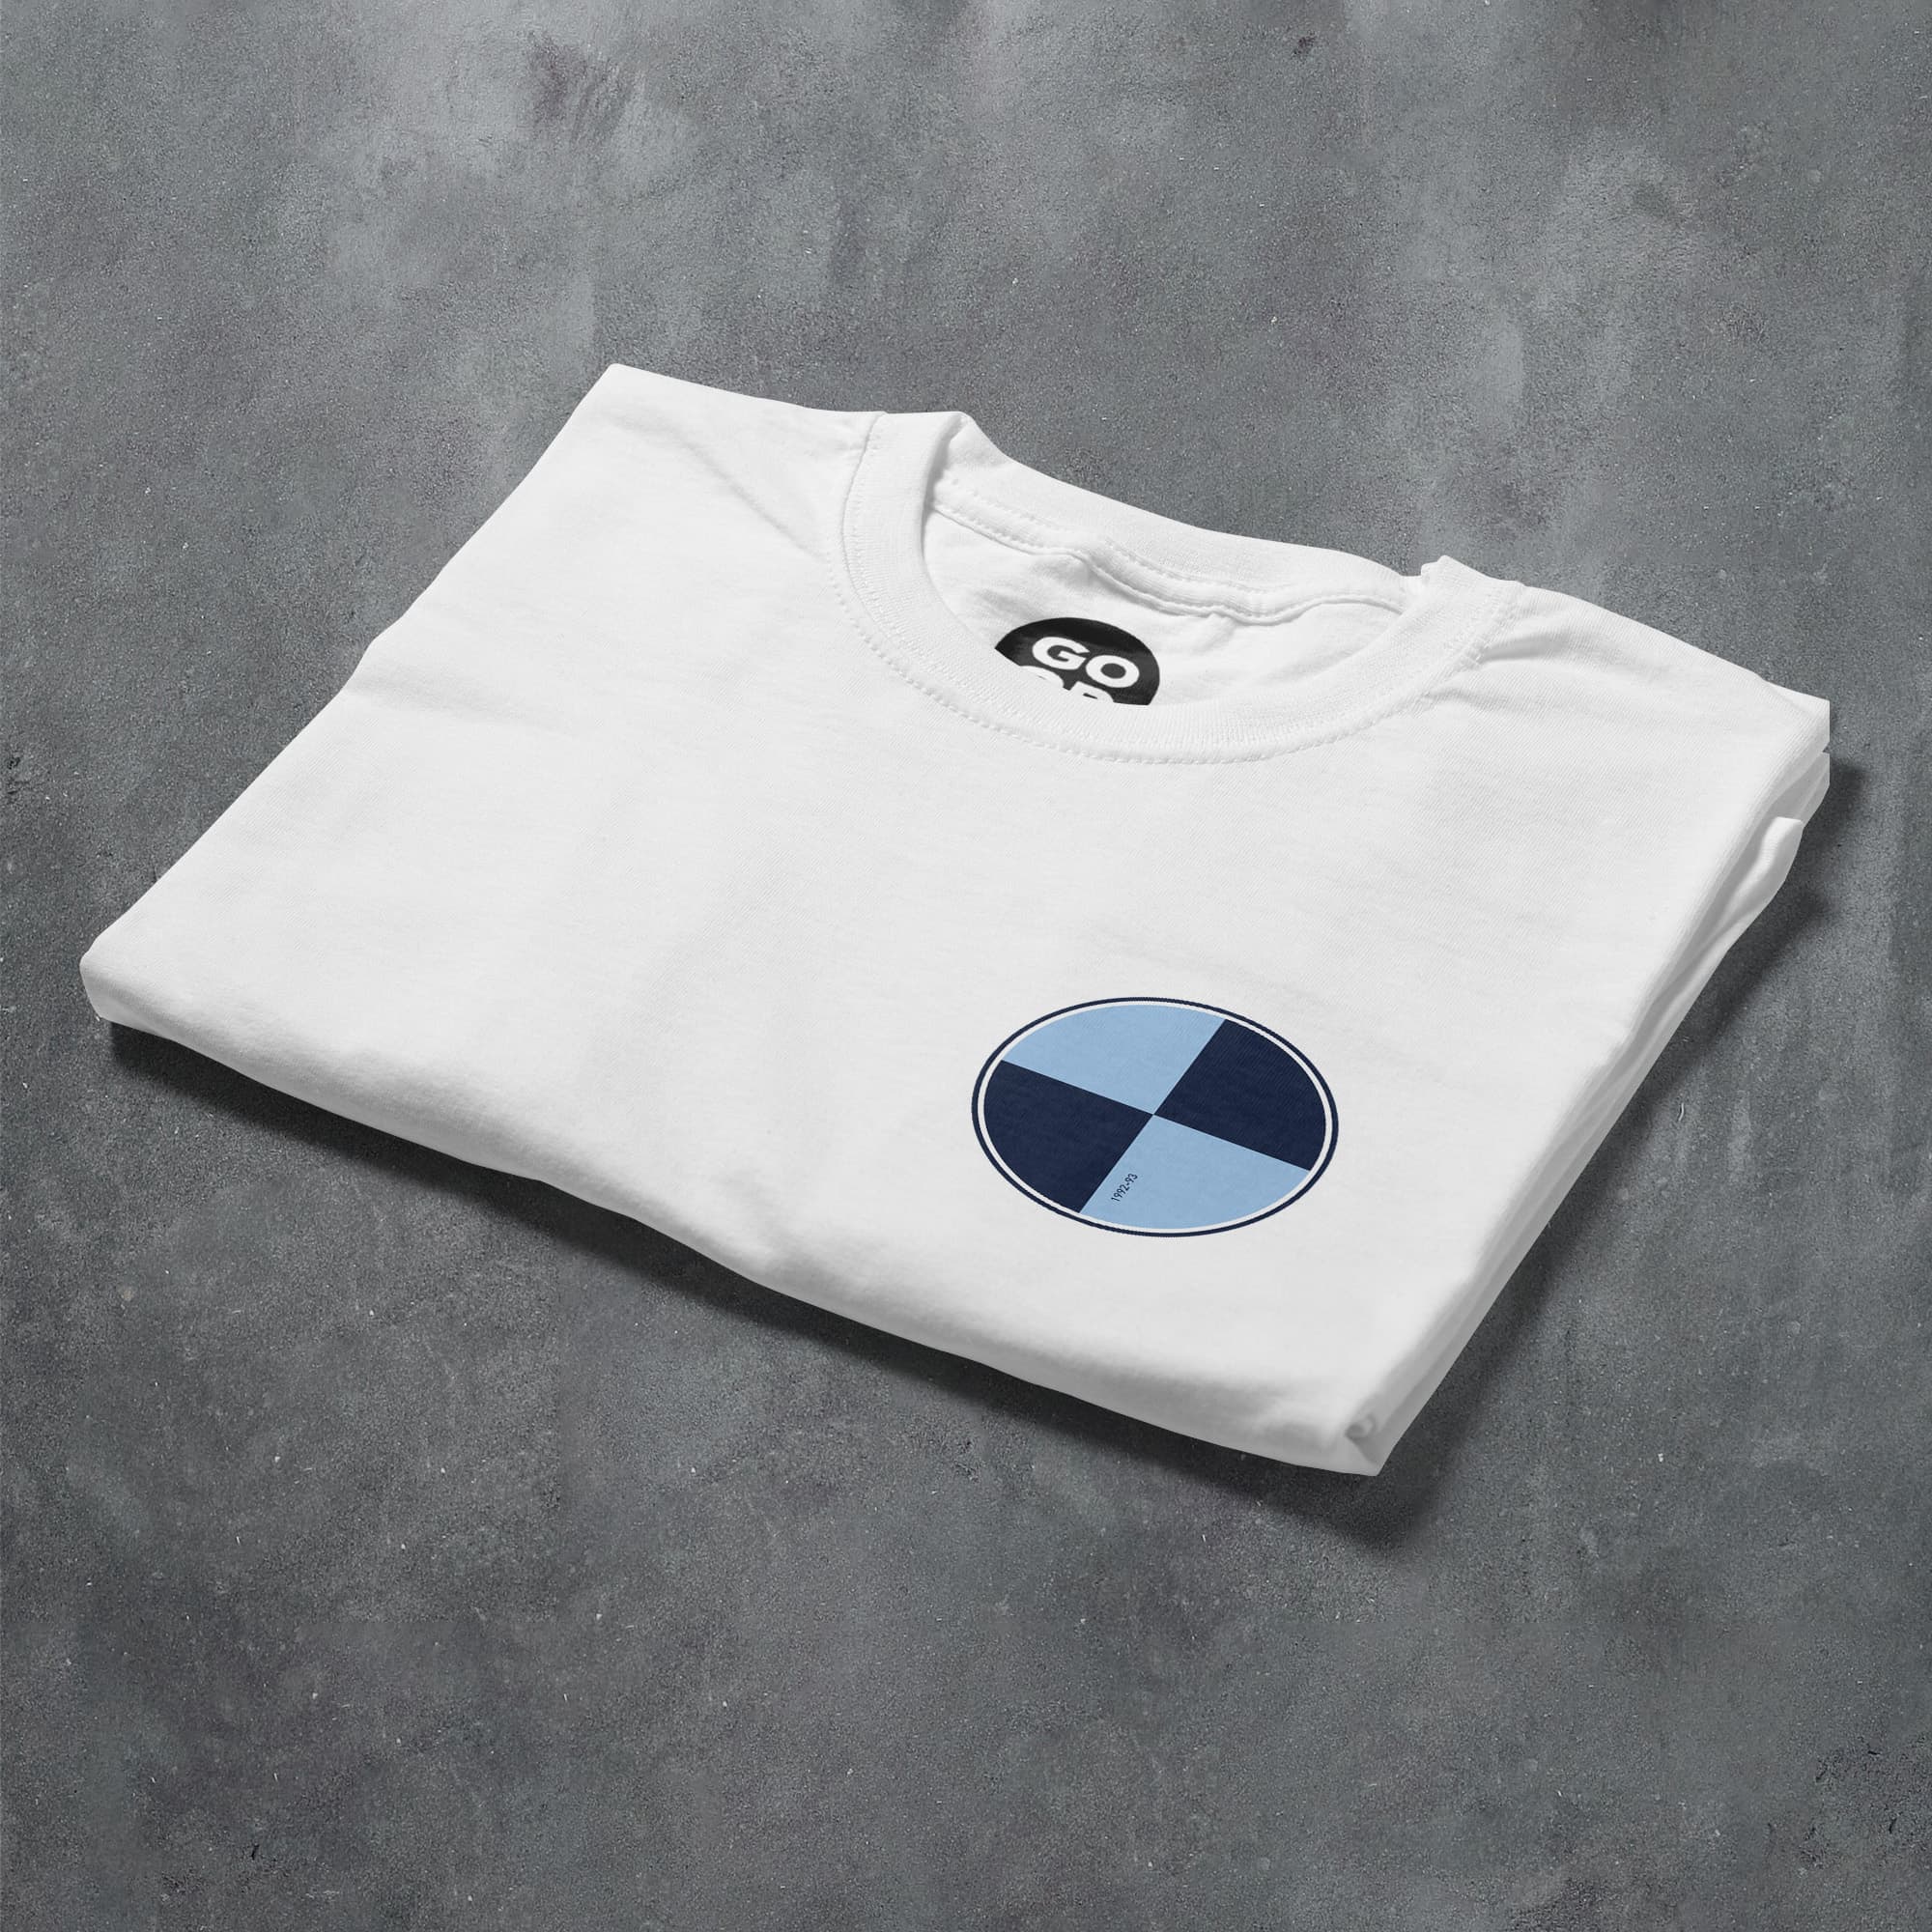 a white t - shirt with a blue and black logo